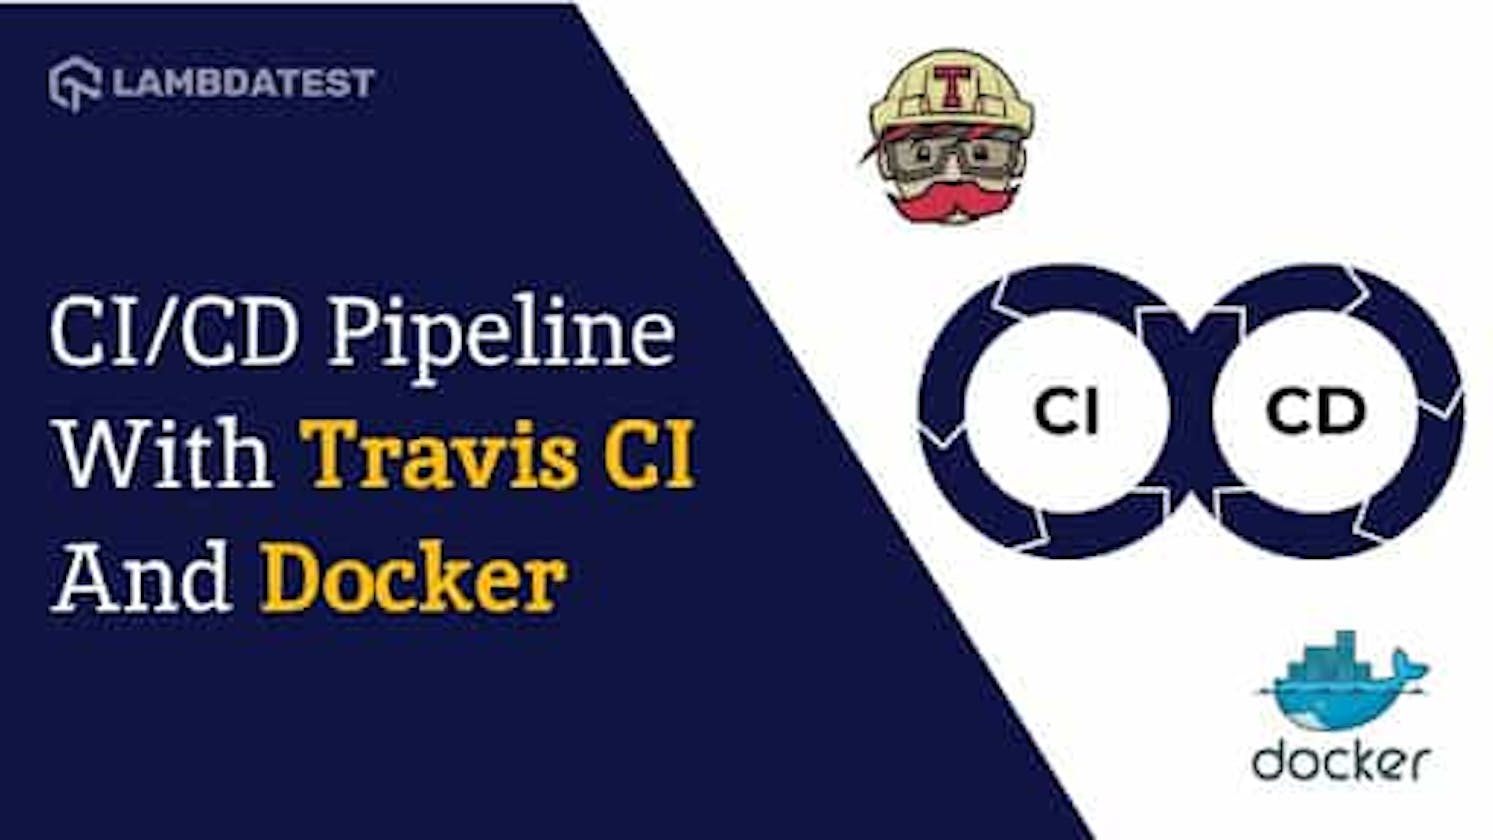 Building A CI/CD Pipeline With Travis CI, Docker, And LambdaTest